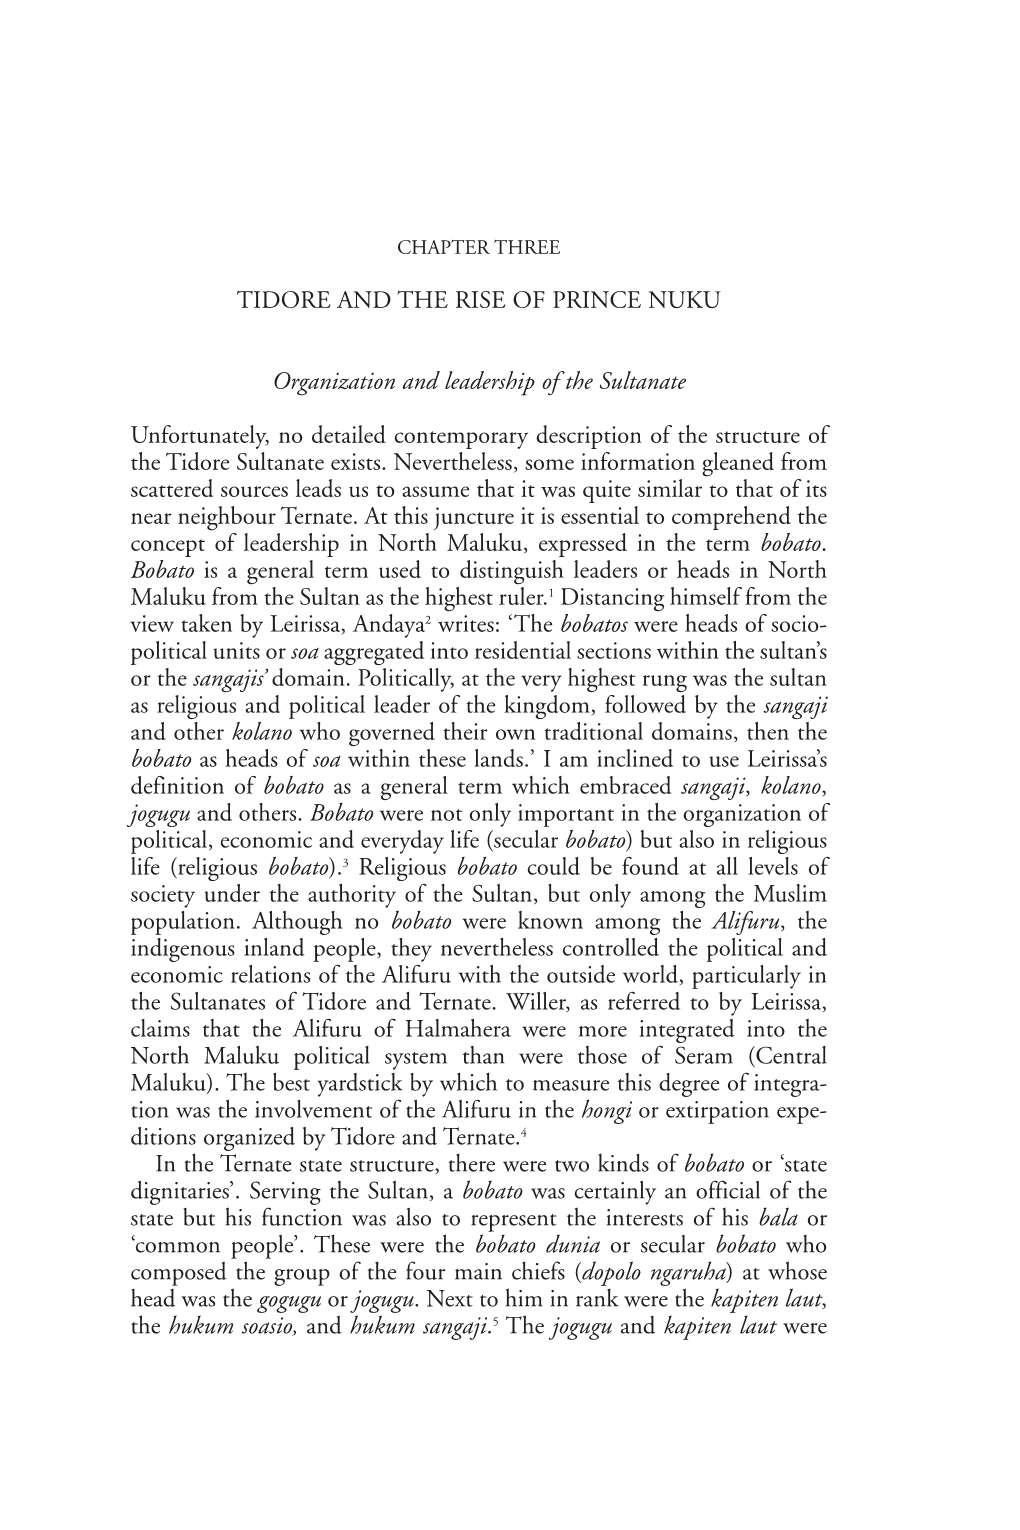 TIDORE and the RISE of PRINCE NUKU Organization and Leadership